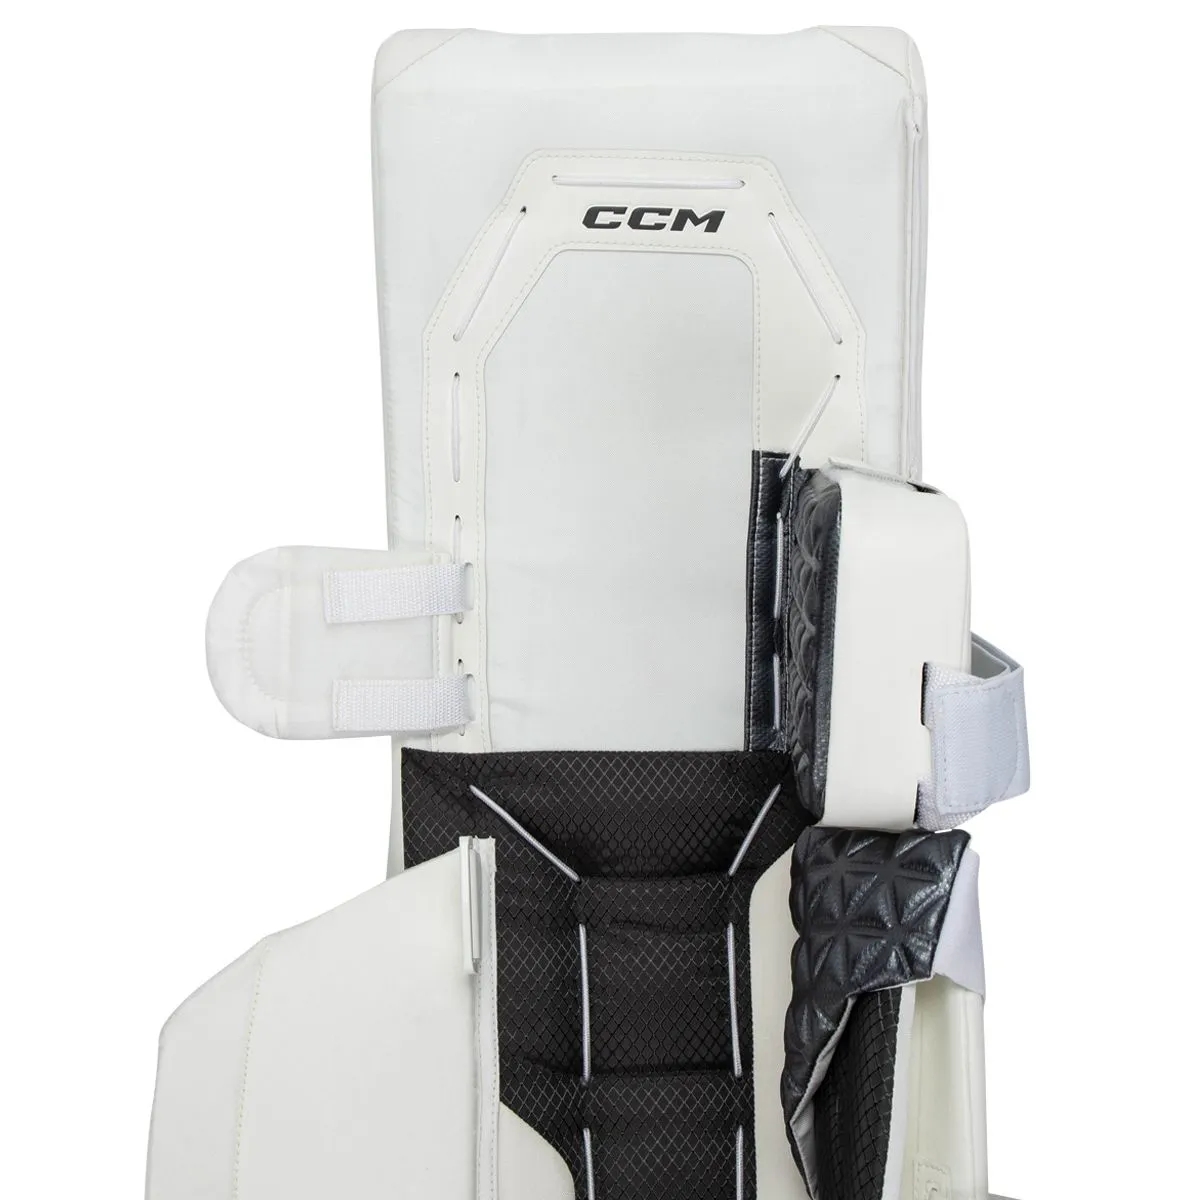 CCM AXIS 2 Sr. Goalie Leg Padsproduct zoom image #7